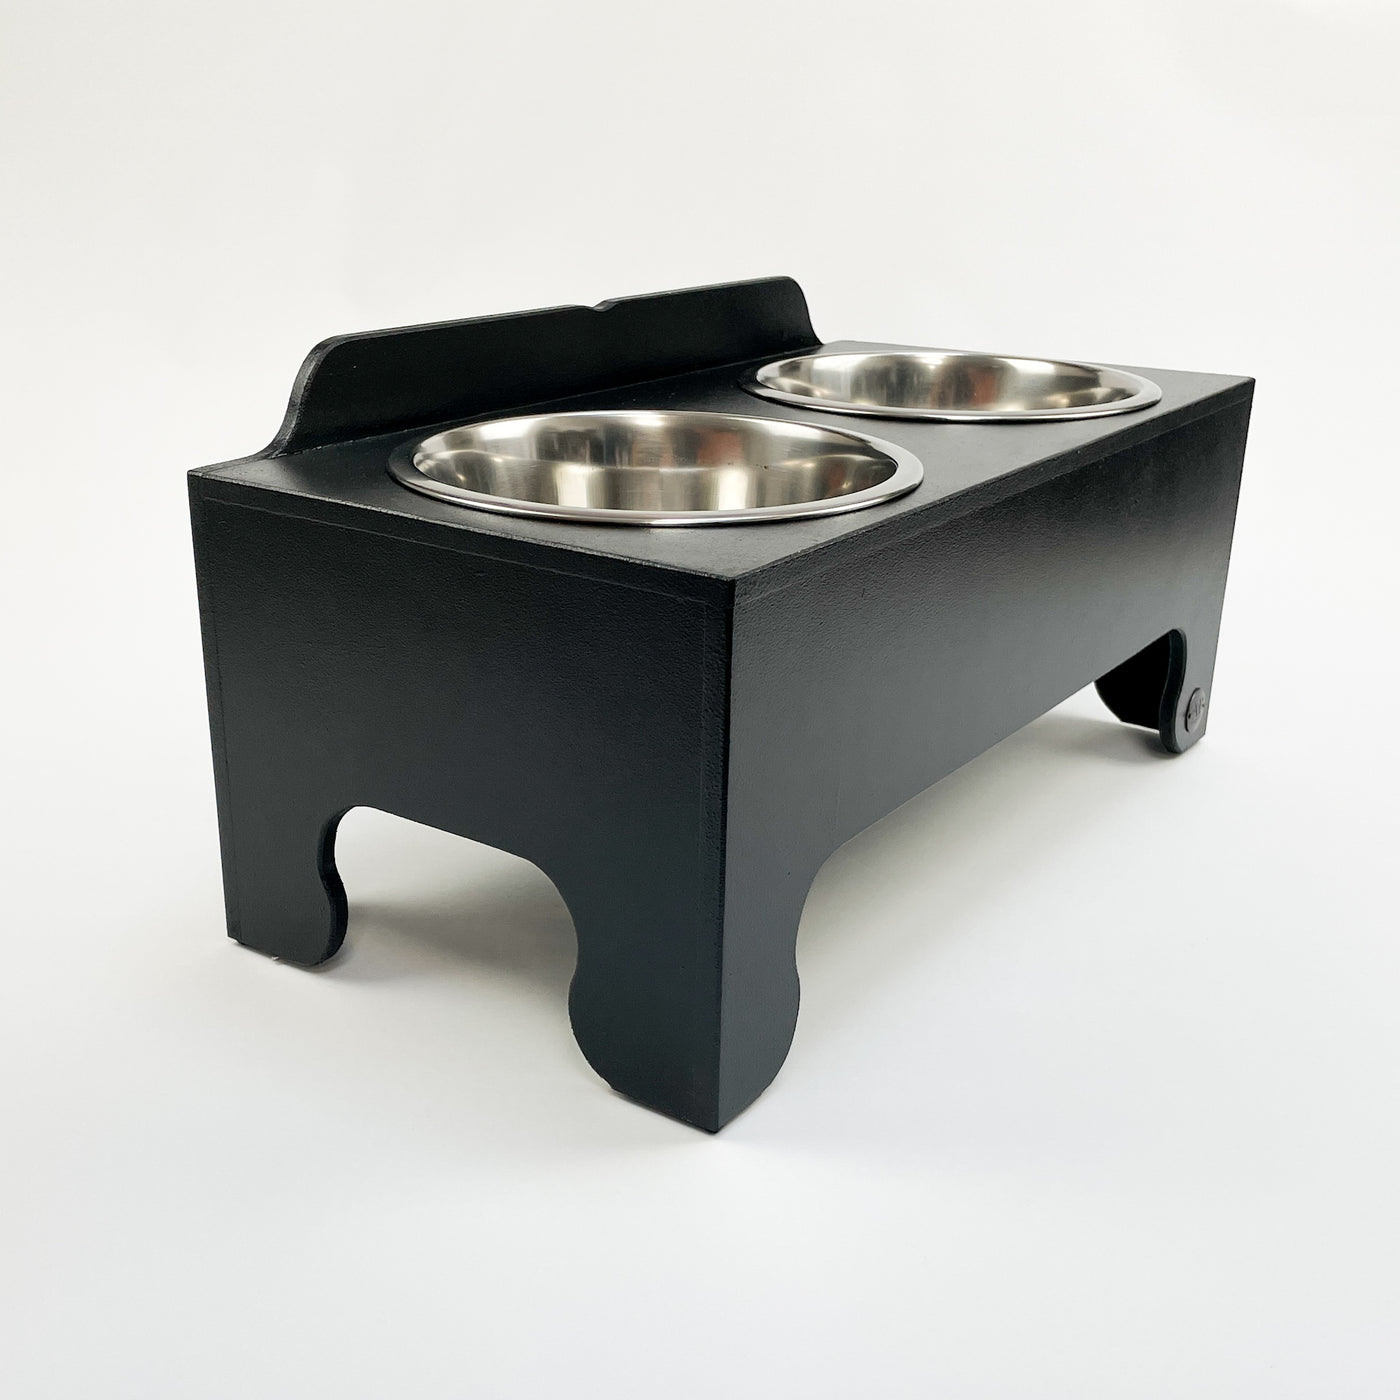 Large raised feeder with two stainless steel dog food bowls, in charcoal black.